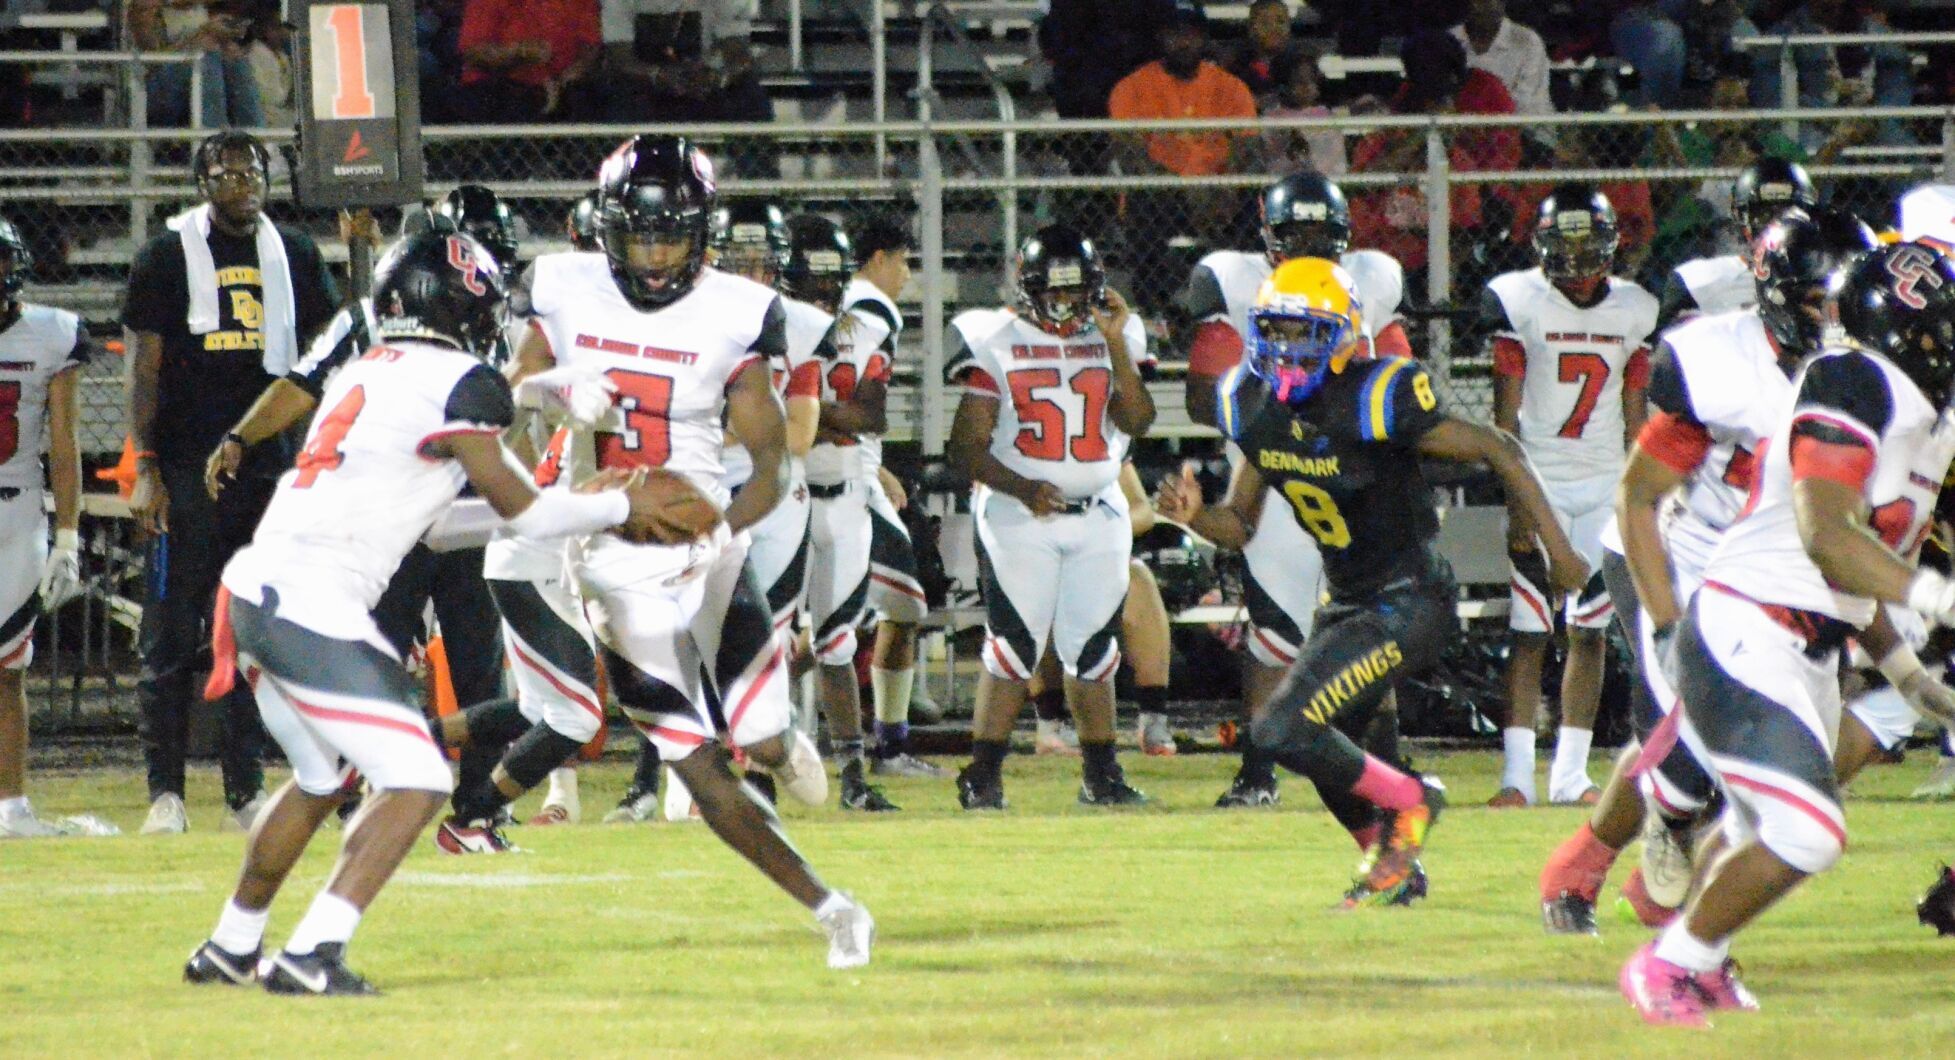 Lake Marion vs Timberland: The Battle for the Region Crown in High School Football